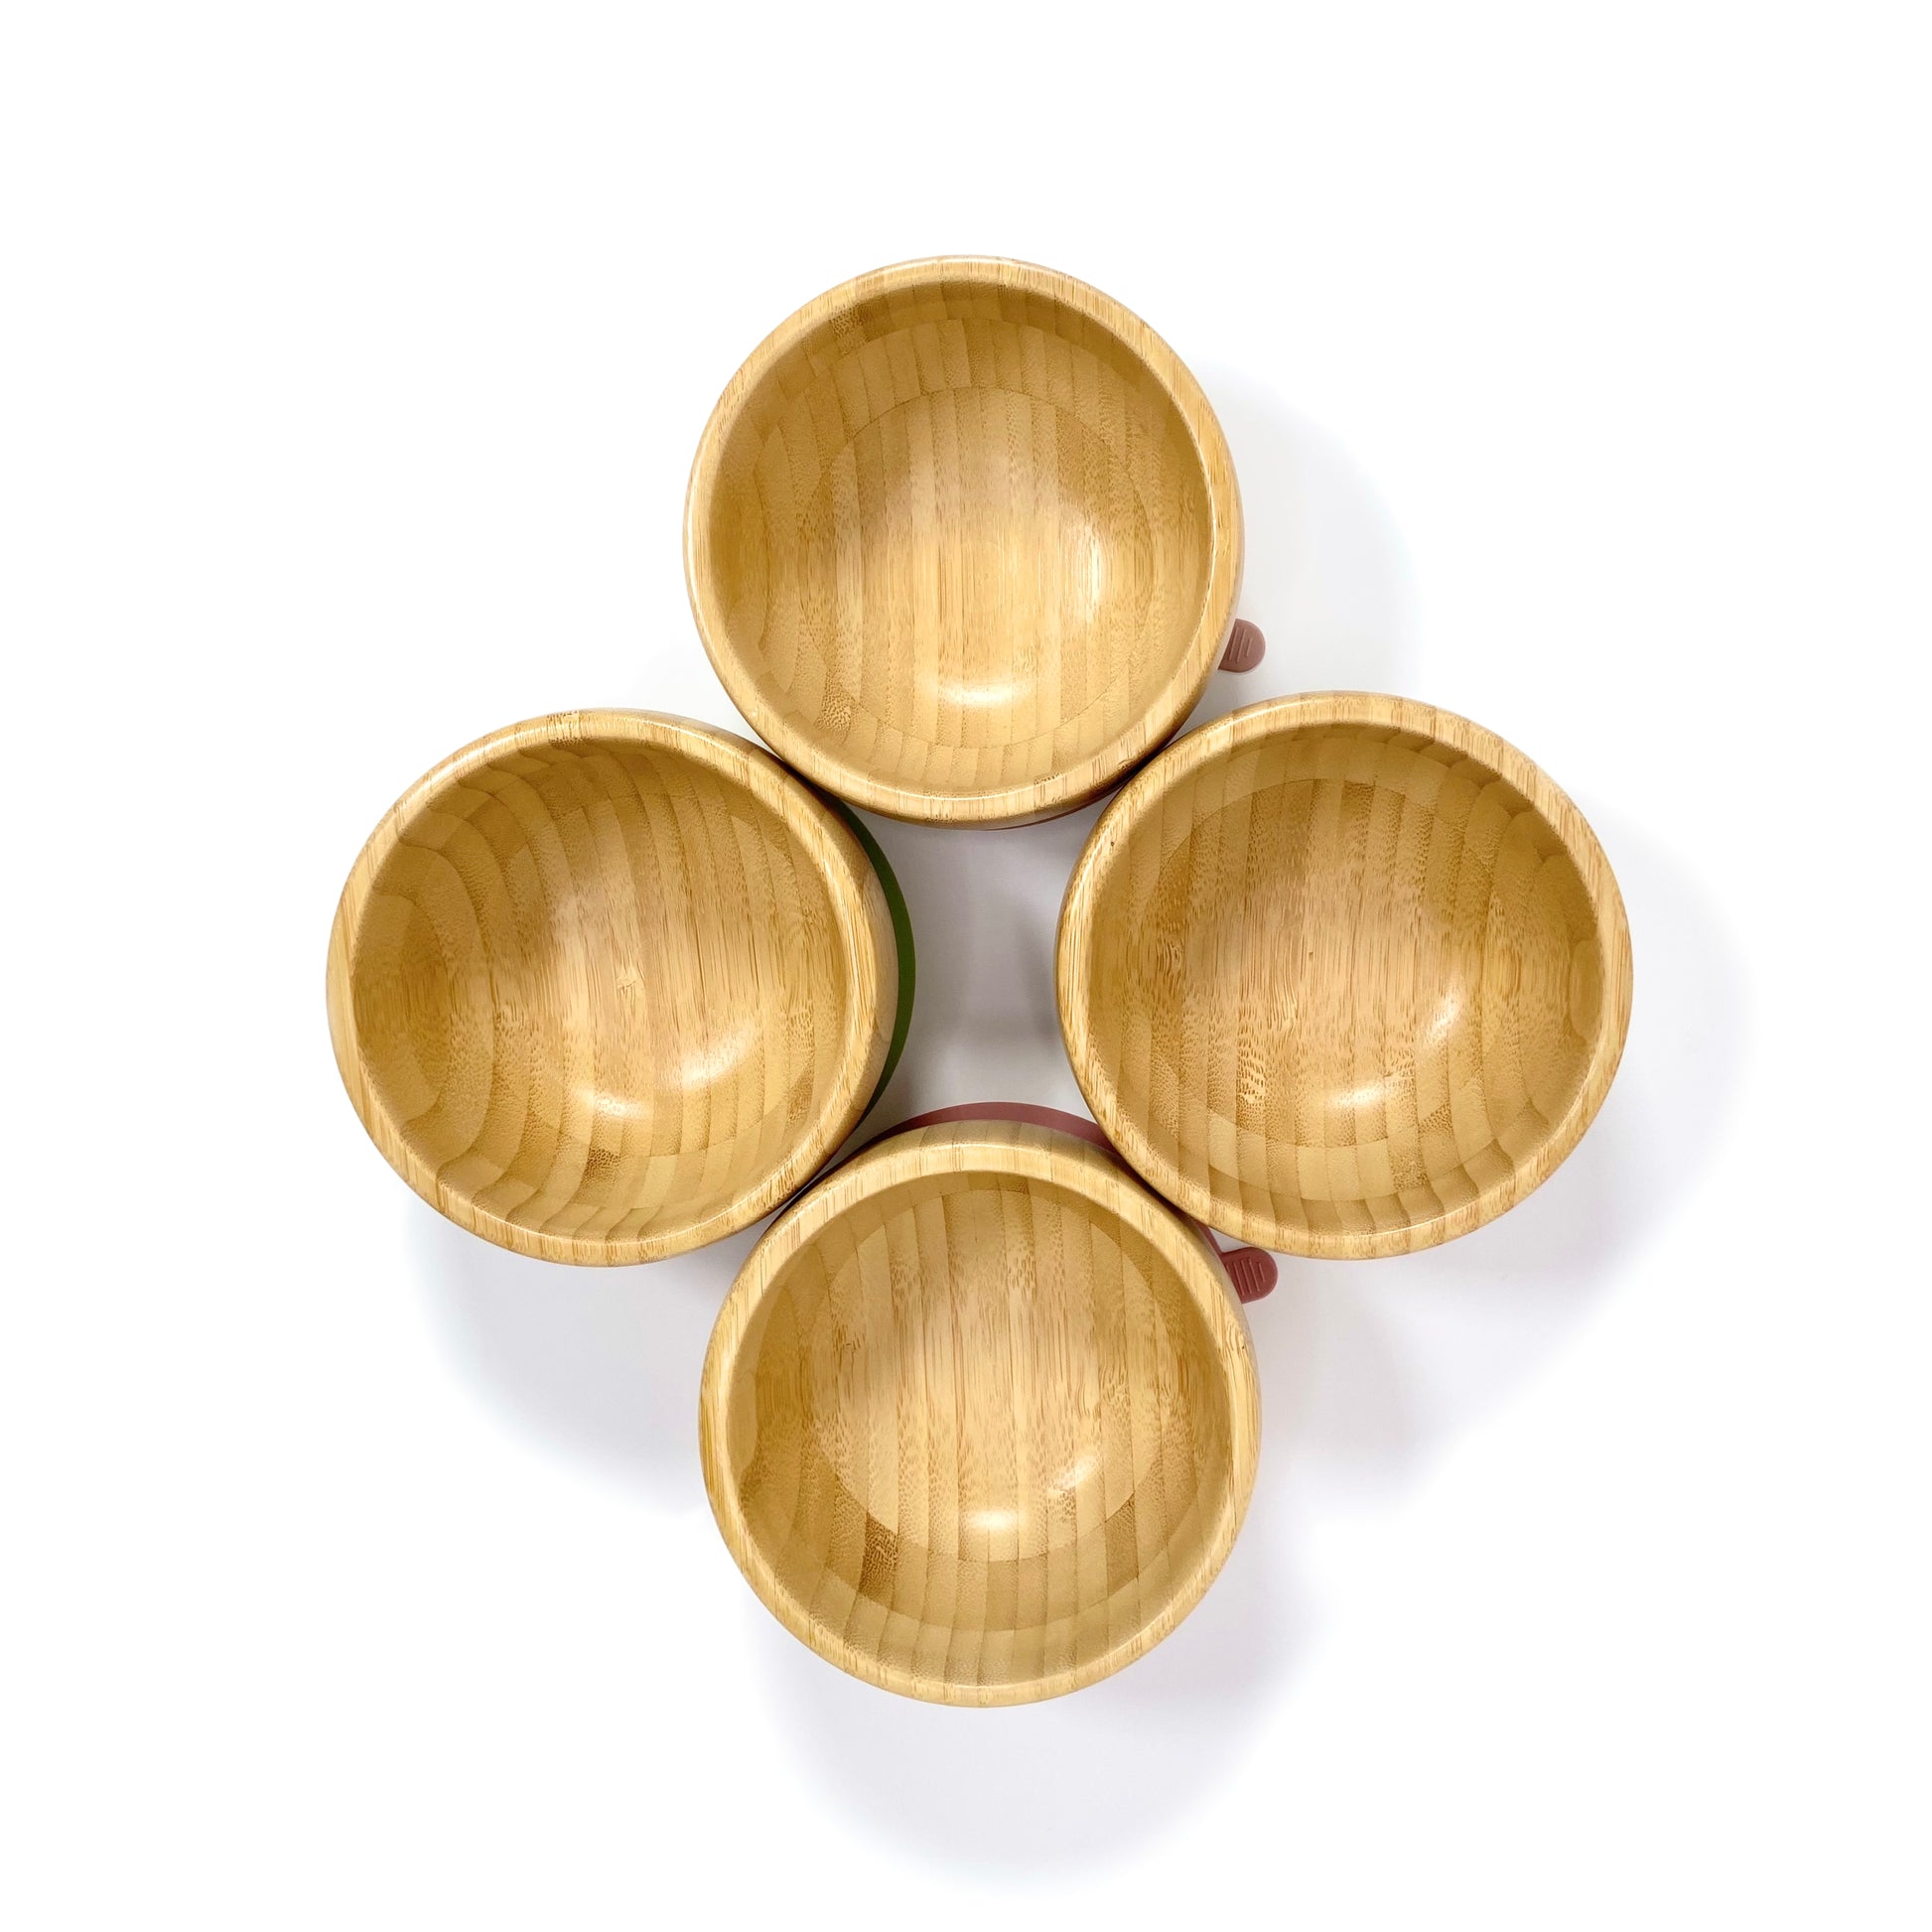 Four children’s bamboo bowls with silicone suction rings, available in four different ring colours: blossom pink, olive green, blush pink and sky blue. Image shows the four bamboo bowls from above. 